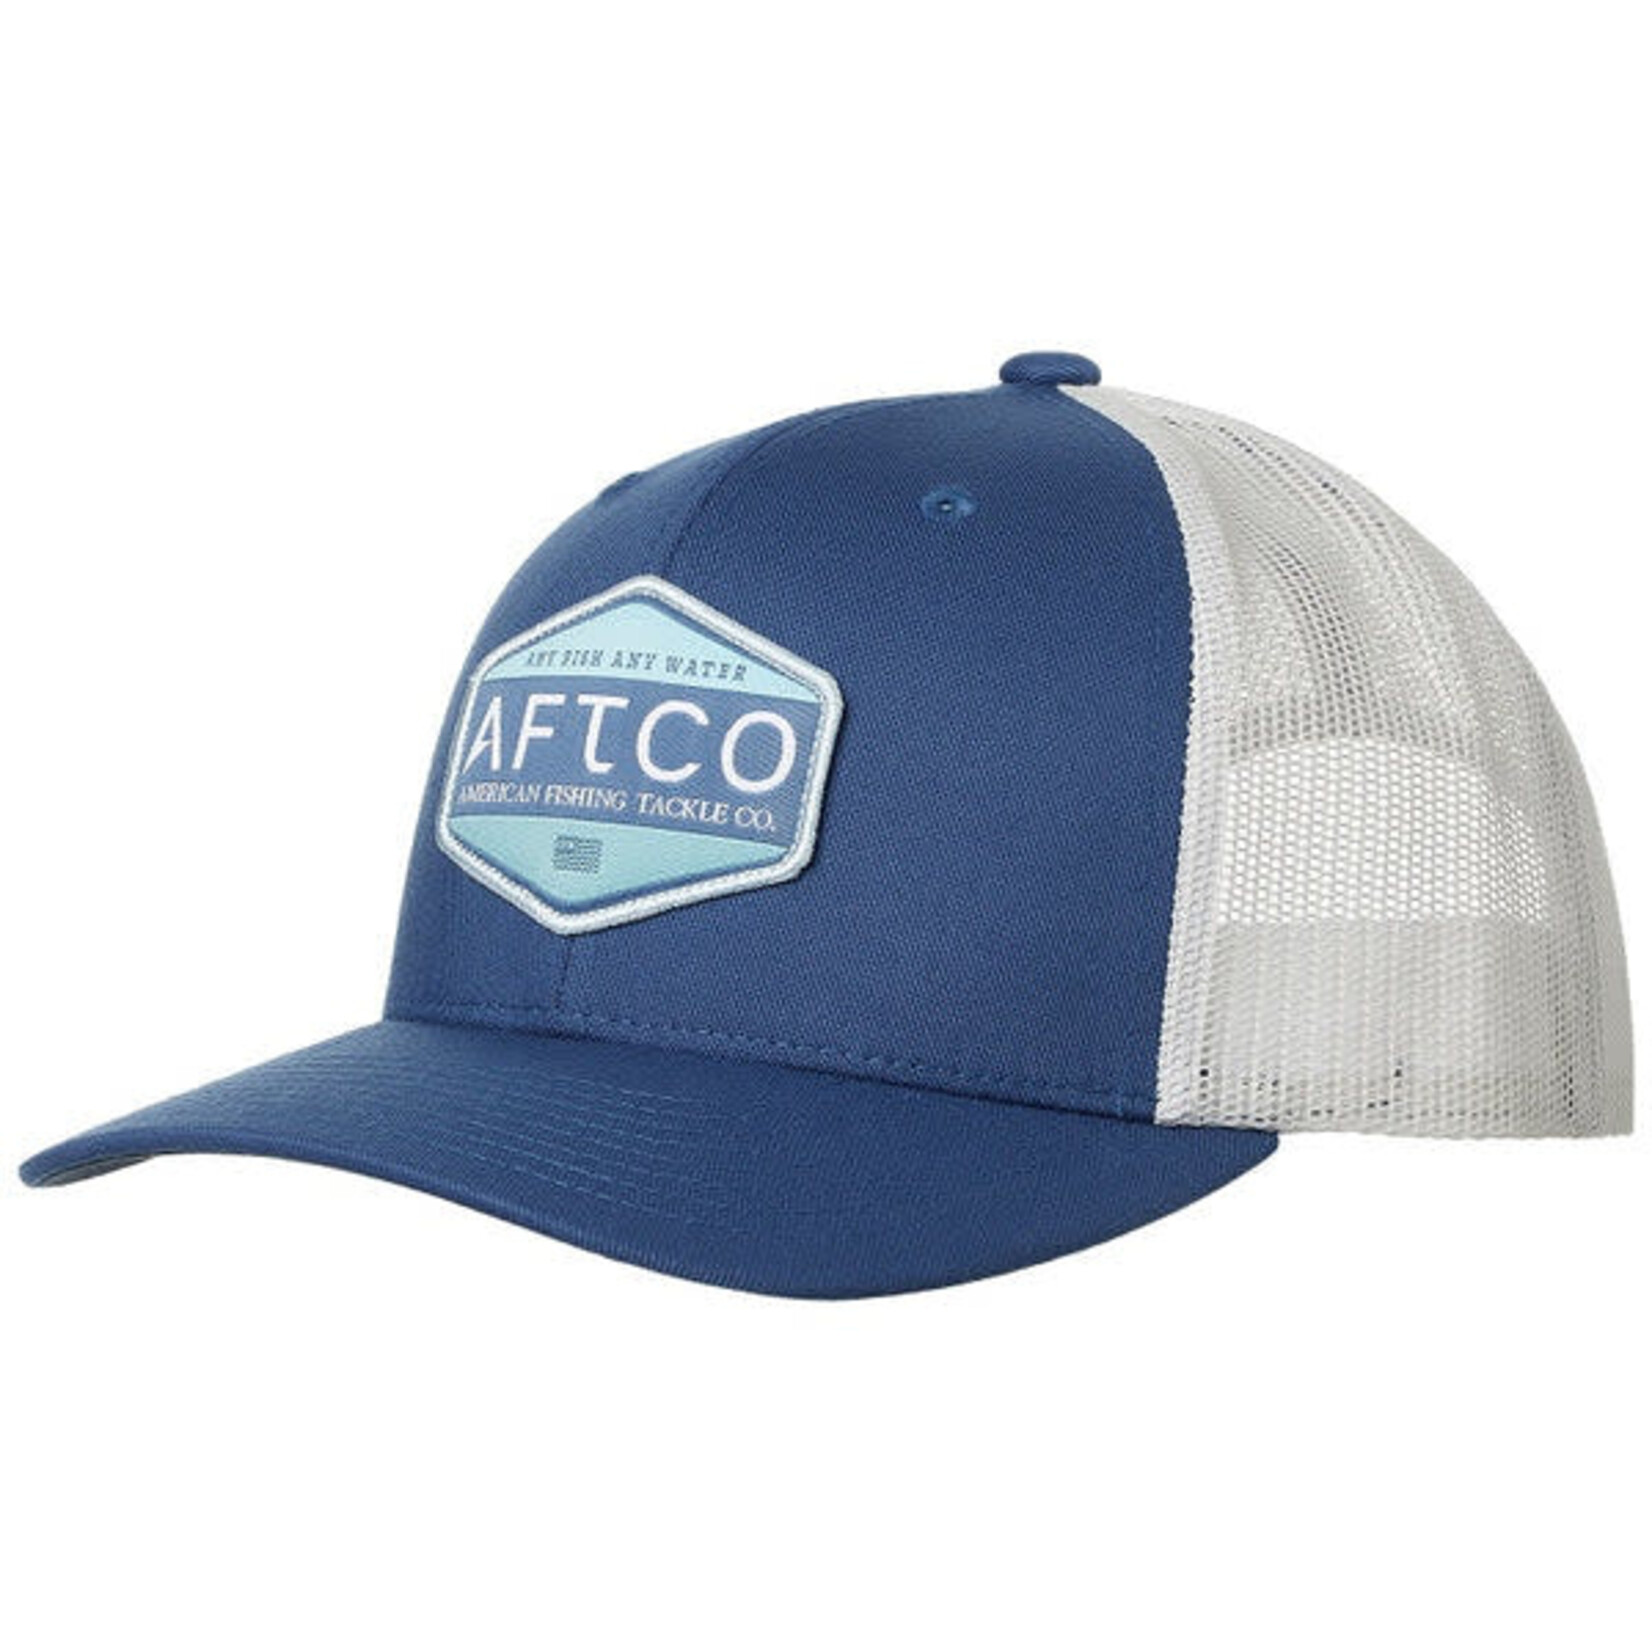 AFTCO Transfer Hat